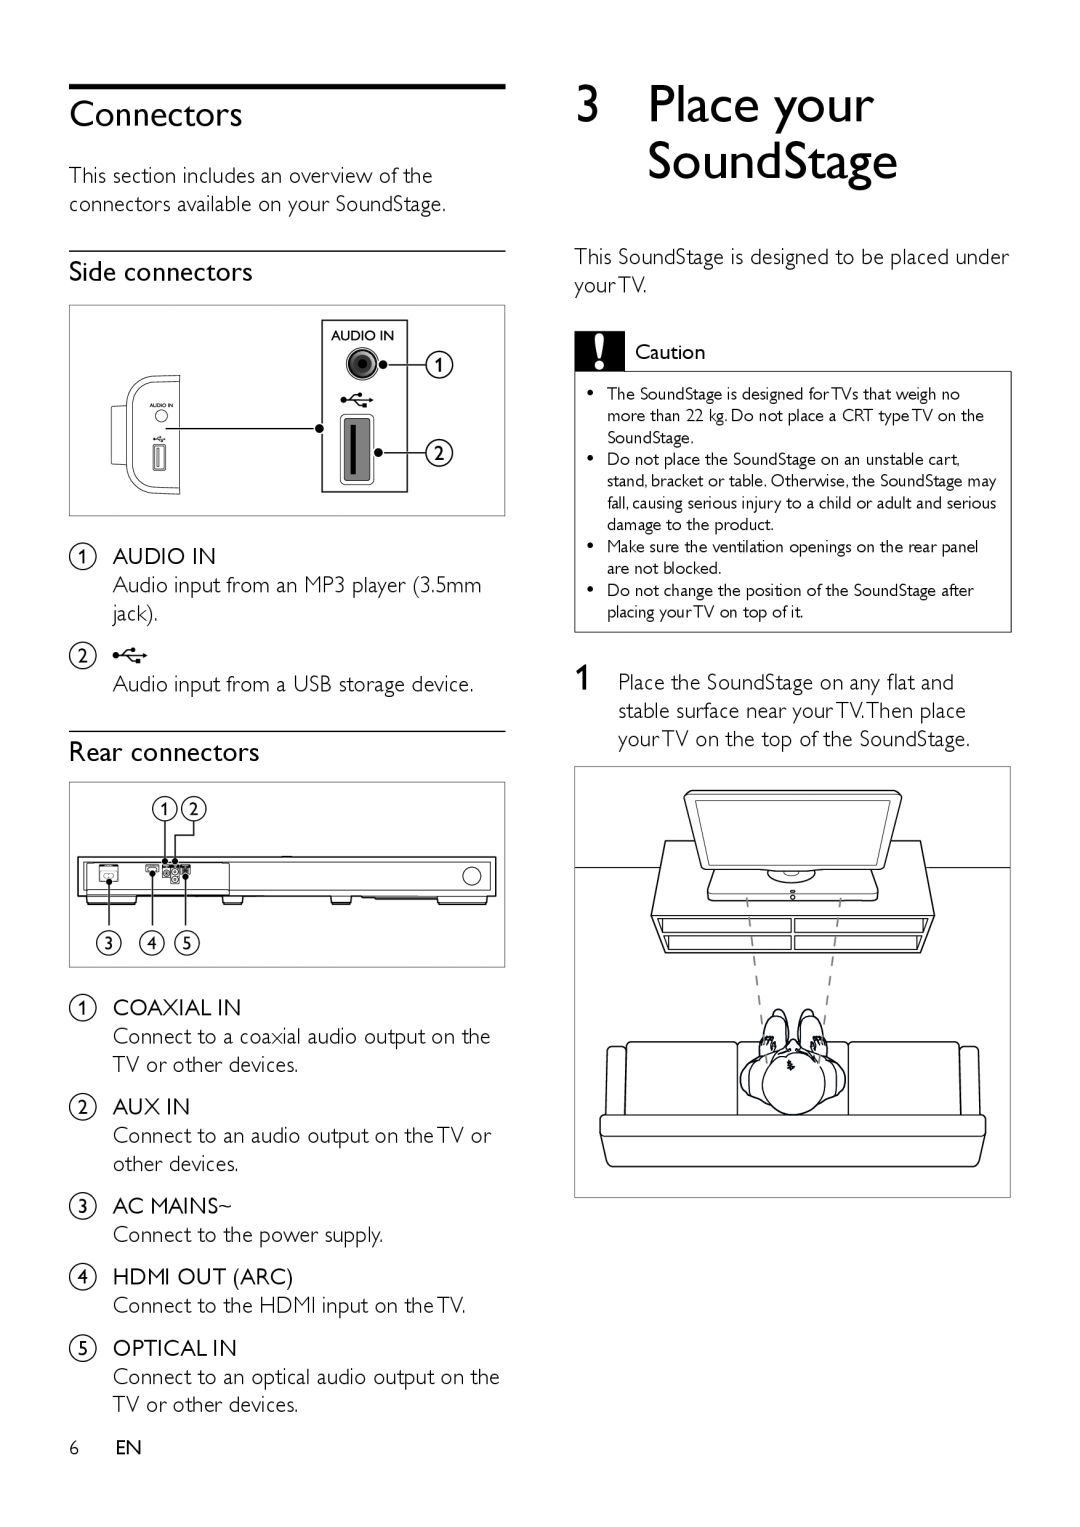 Philips HTL4110B user manual 3Place your SoundStage, Connectors 